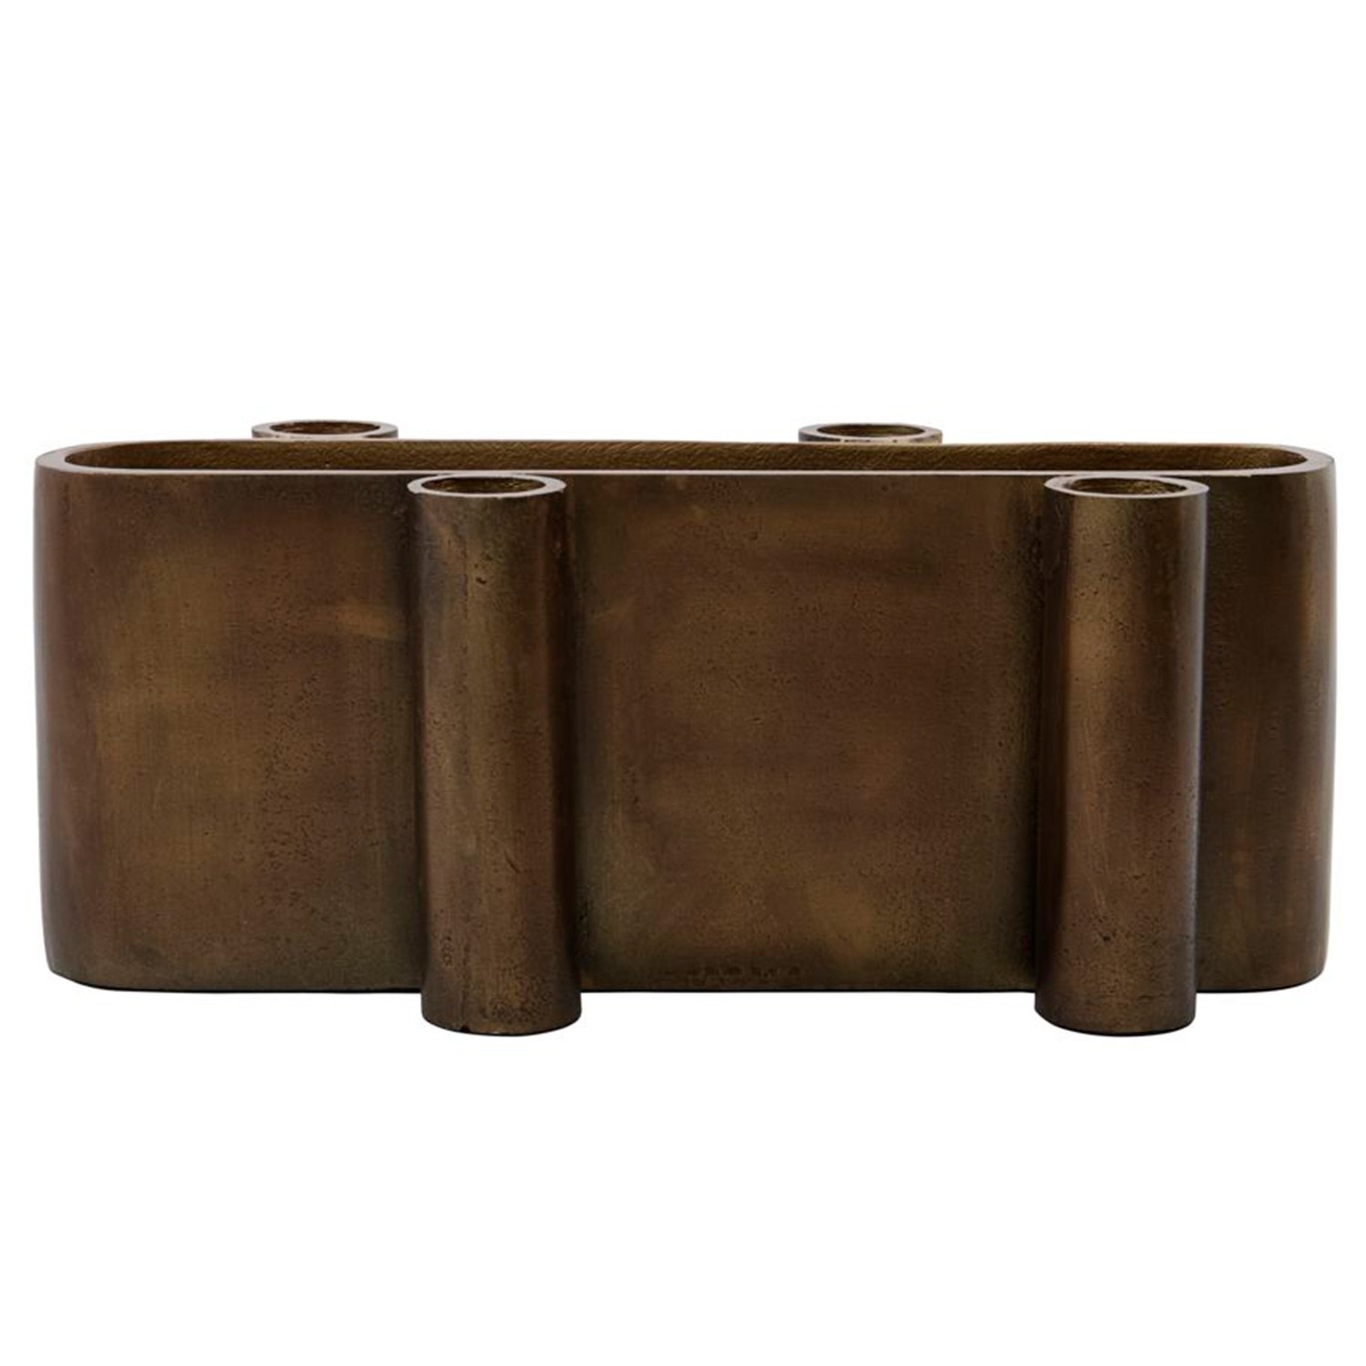 Four Oval Advent Candle Holder, Antique Brass